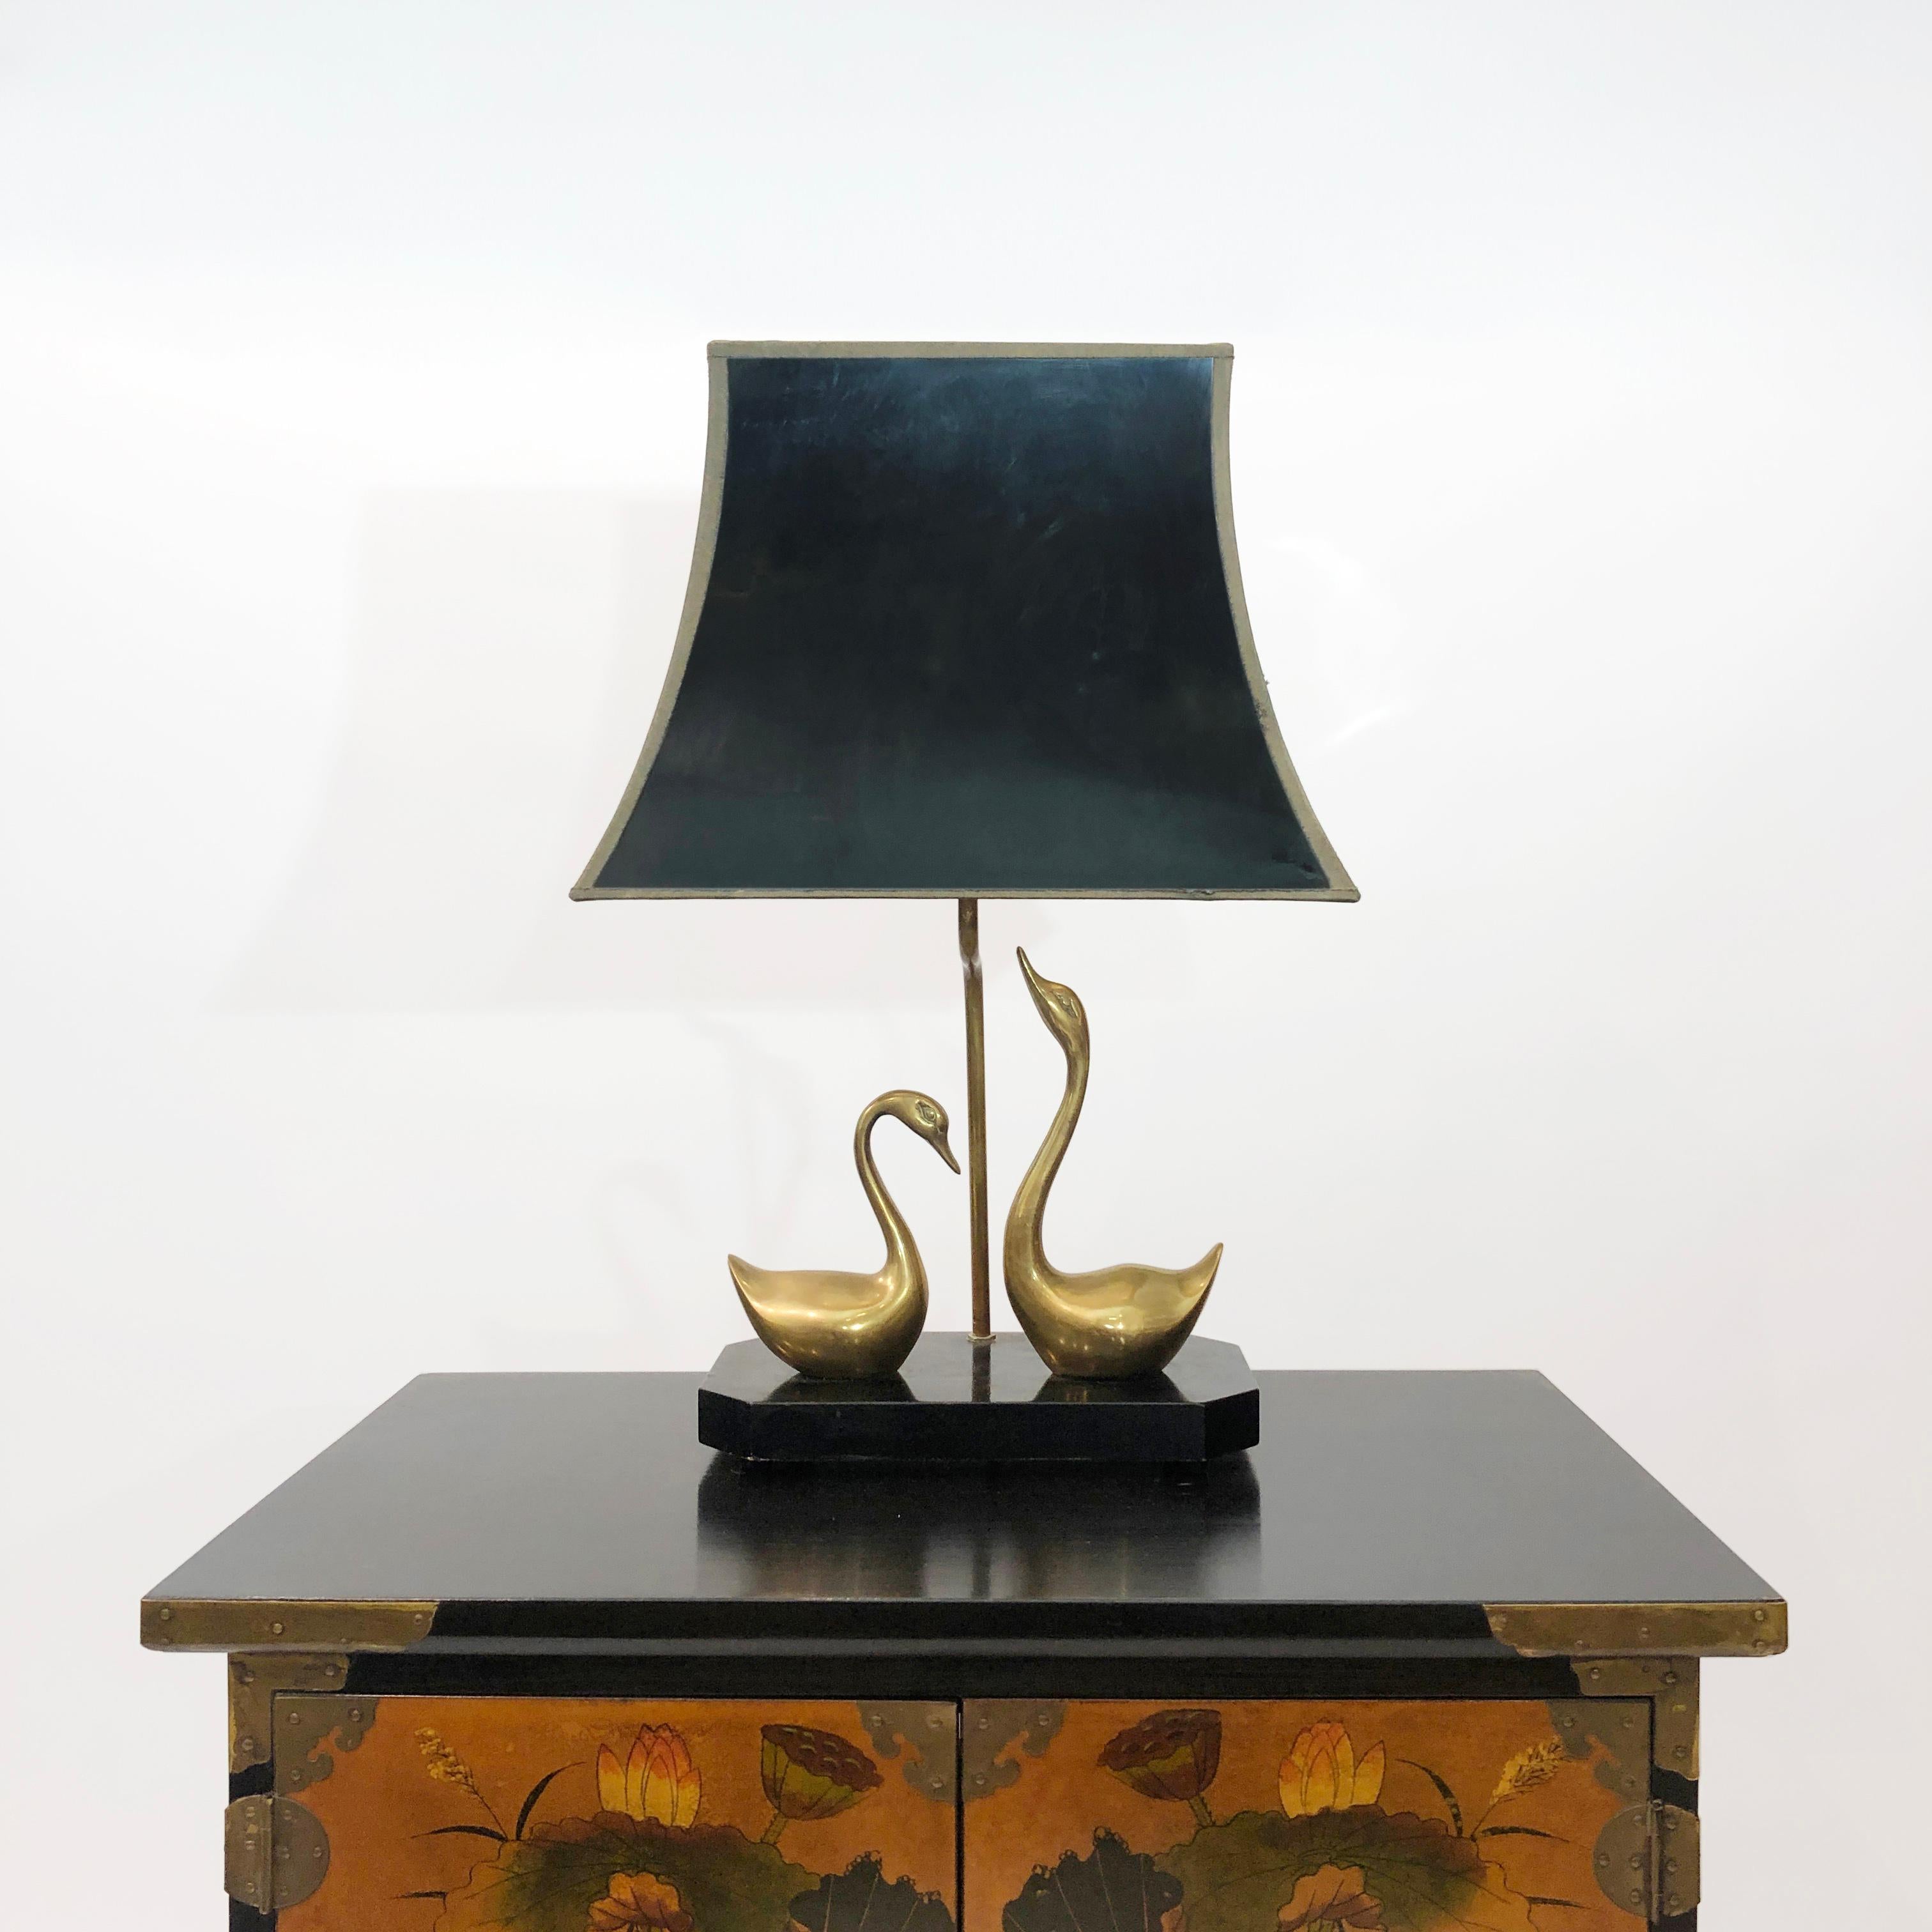 A table lamp from the legendary French interior design firm Maison Jansen, depicting two courting swans. Each swan is elegantly produced from patinated brass, with one slightly stretching its neck upwards. The organic curved lines of each bird sit